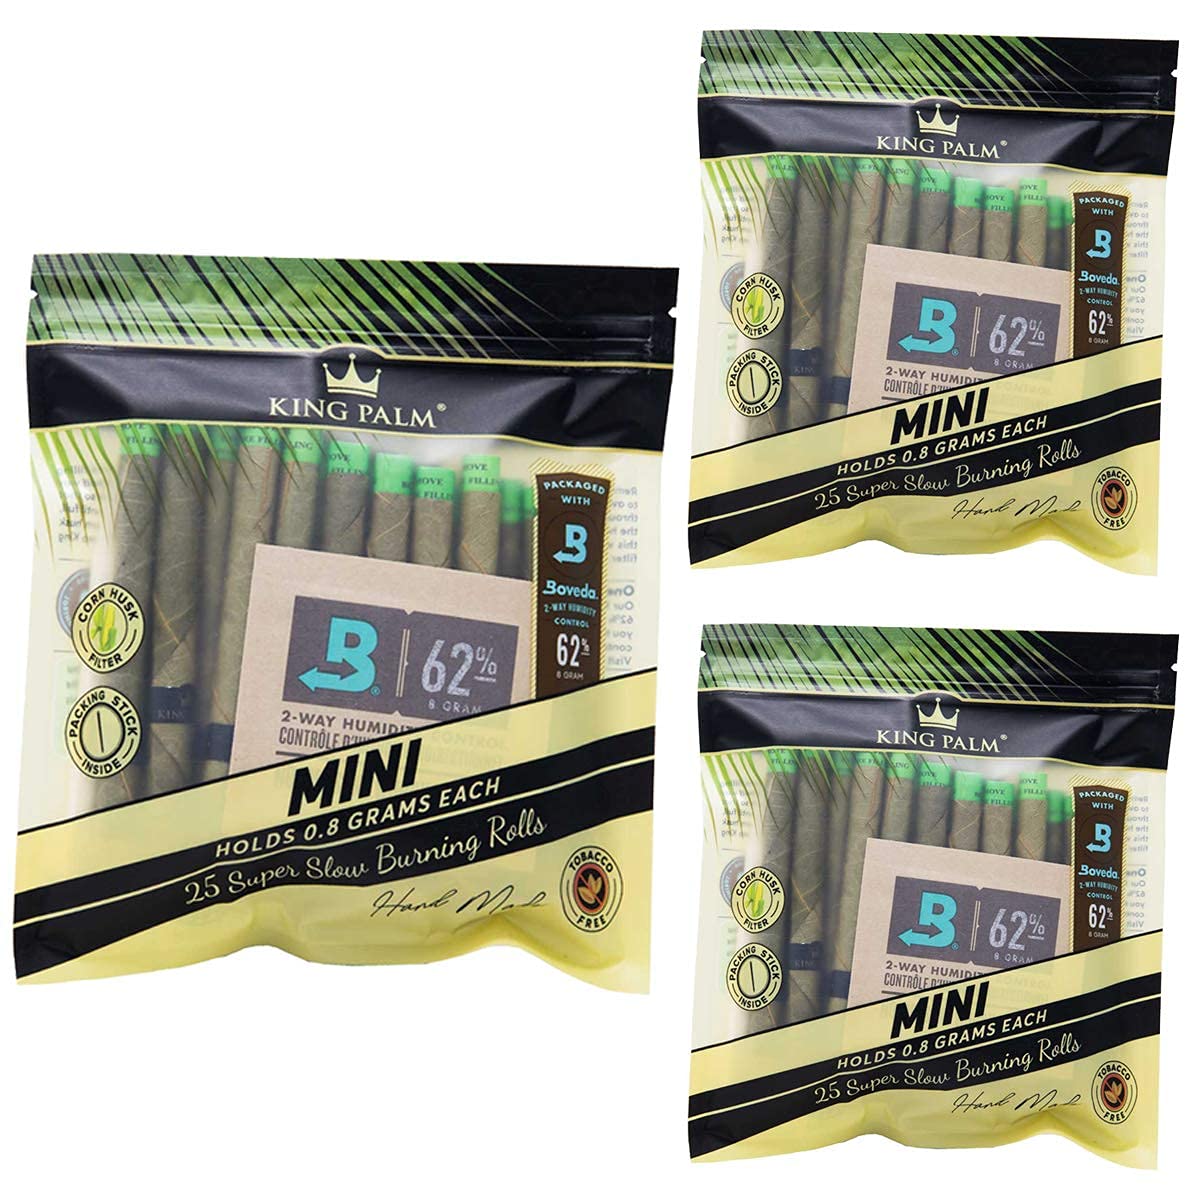 King Palm Mini Size Natural Pre Roll Palm Leaf Tubes - 25 Pack